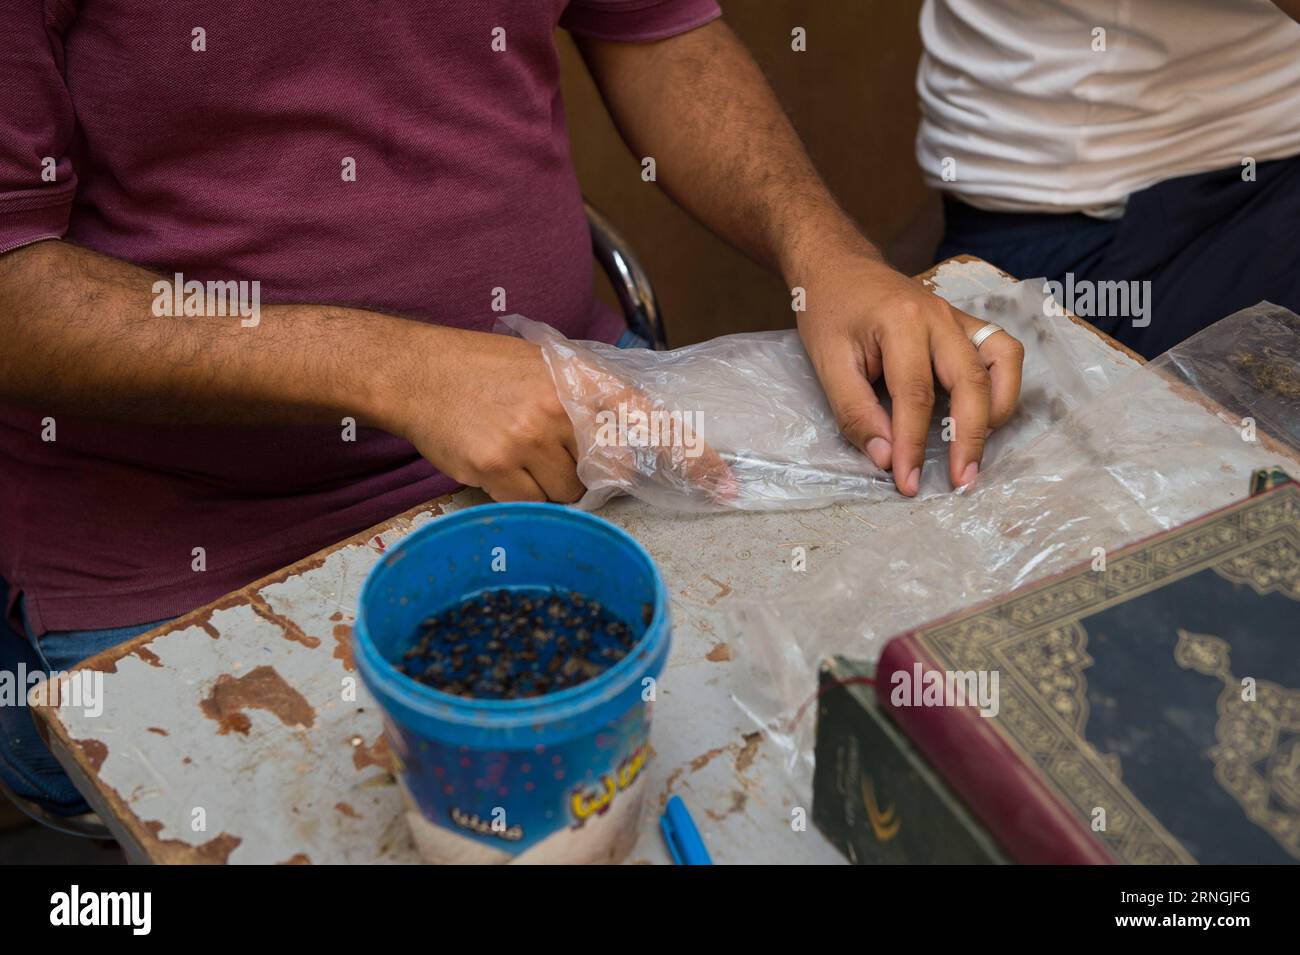 Kairo - Ägypter mit Gesundheitsproblemen lassen sich mit Bienen behandeln GIZA, Ibrahim gets the bee from a plastic bag during the apitherapy, or bee-sting therapy, in Giza Governorate, Sept. 30, 2016. Al-Sayeh and her younger brother Ibrahim treated patients free of charge with the stings of live bees, a practice known as apitherapy, in Giza Governorate. Though denounced by many researchers for lacking sound medical evidences, apitherapy, which can date back to ancient Egypt, is a form of alternative treatment that has spread in recent decades to many countries to cure muscle problems, kidney Stock Photo